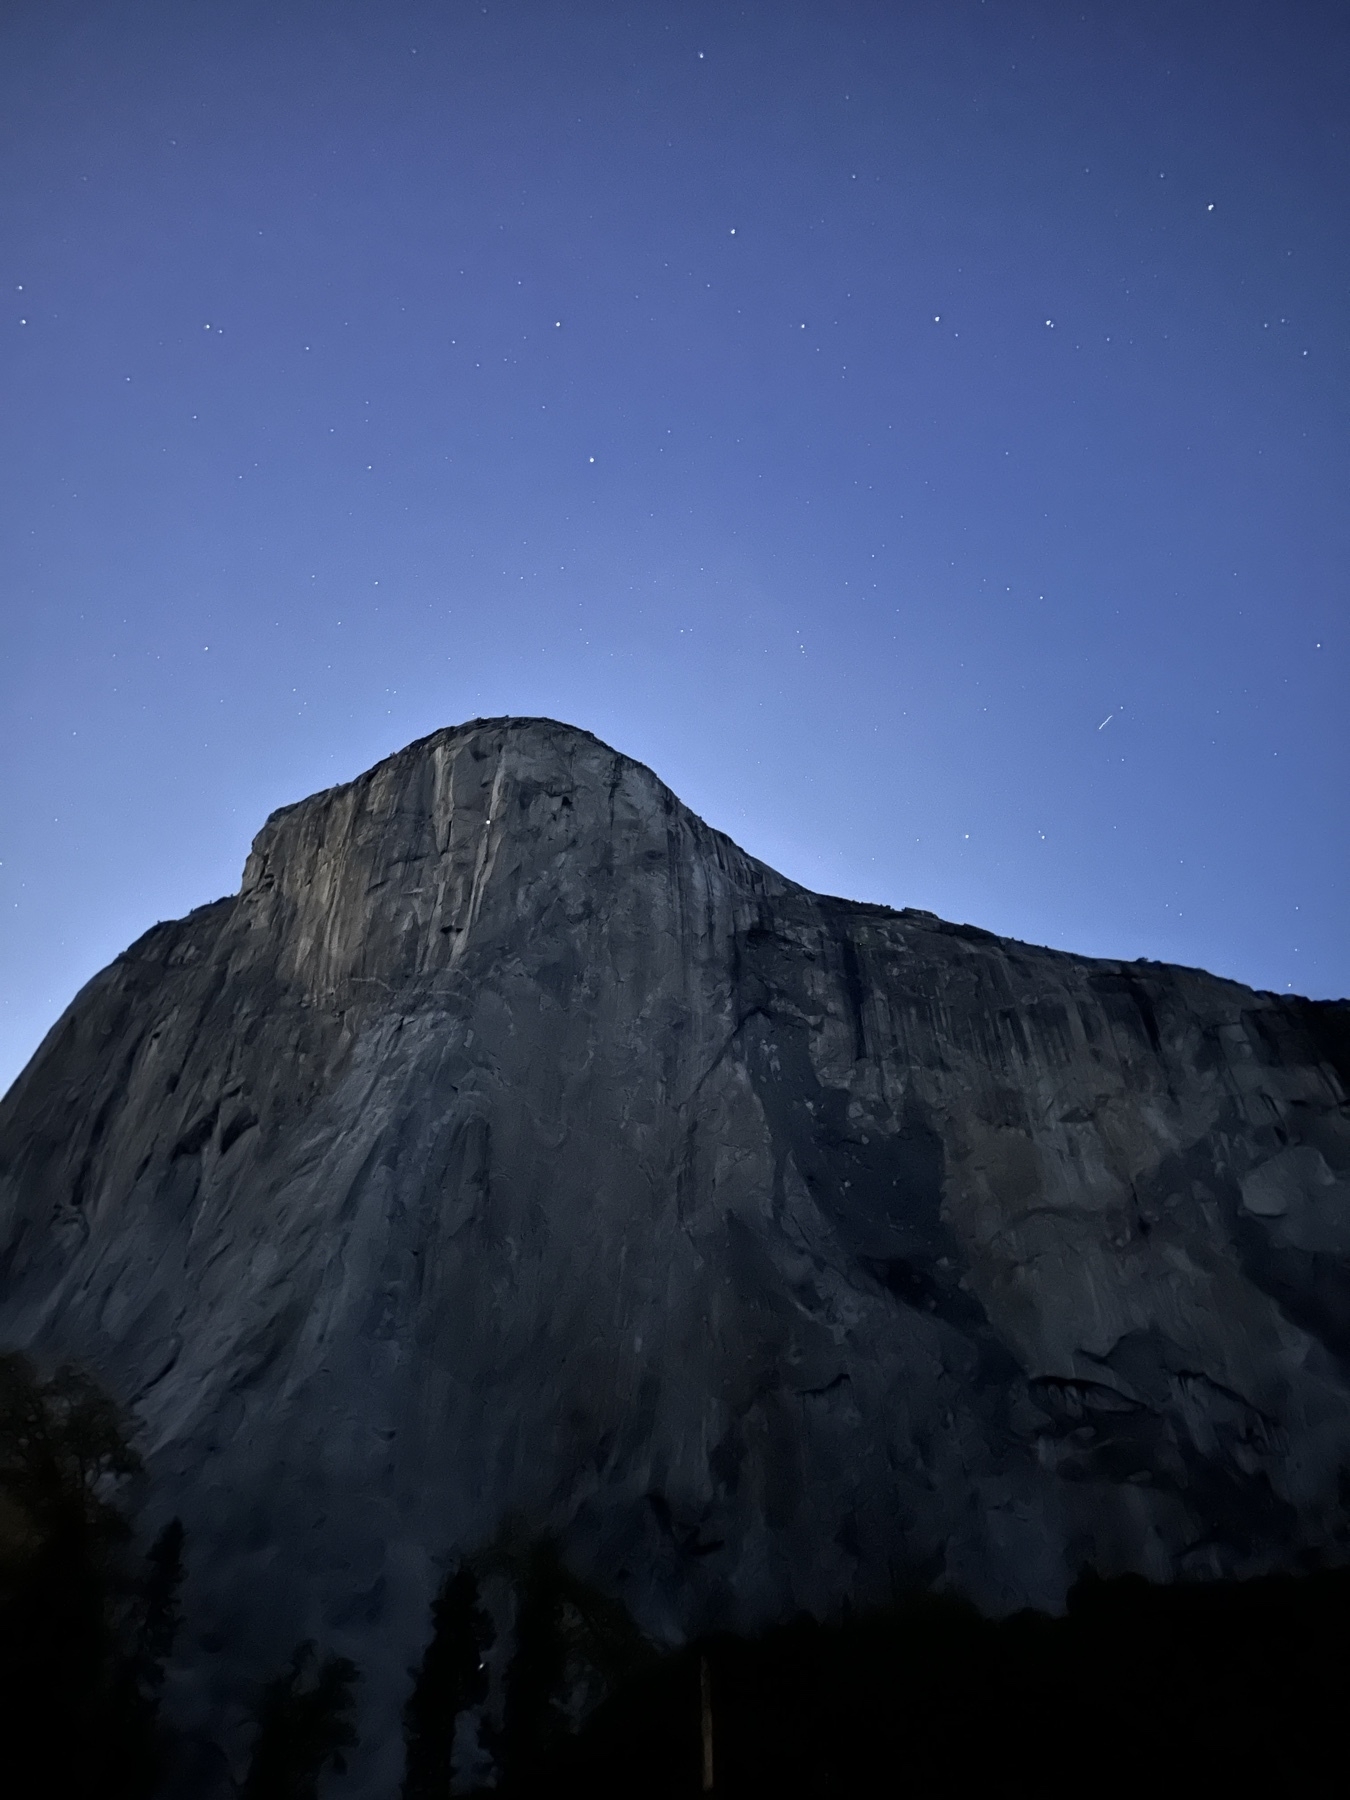 The Big Dipper pointing down at El Capitan, stars above the biggest rock on Earth, after sunset, with the flash of a climber’s headlamp at Camp 6, a mere 4 pitches from from the top.